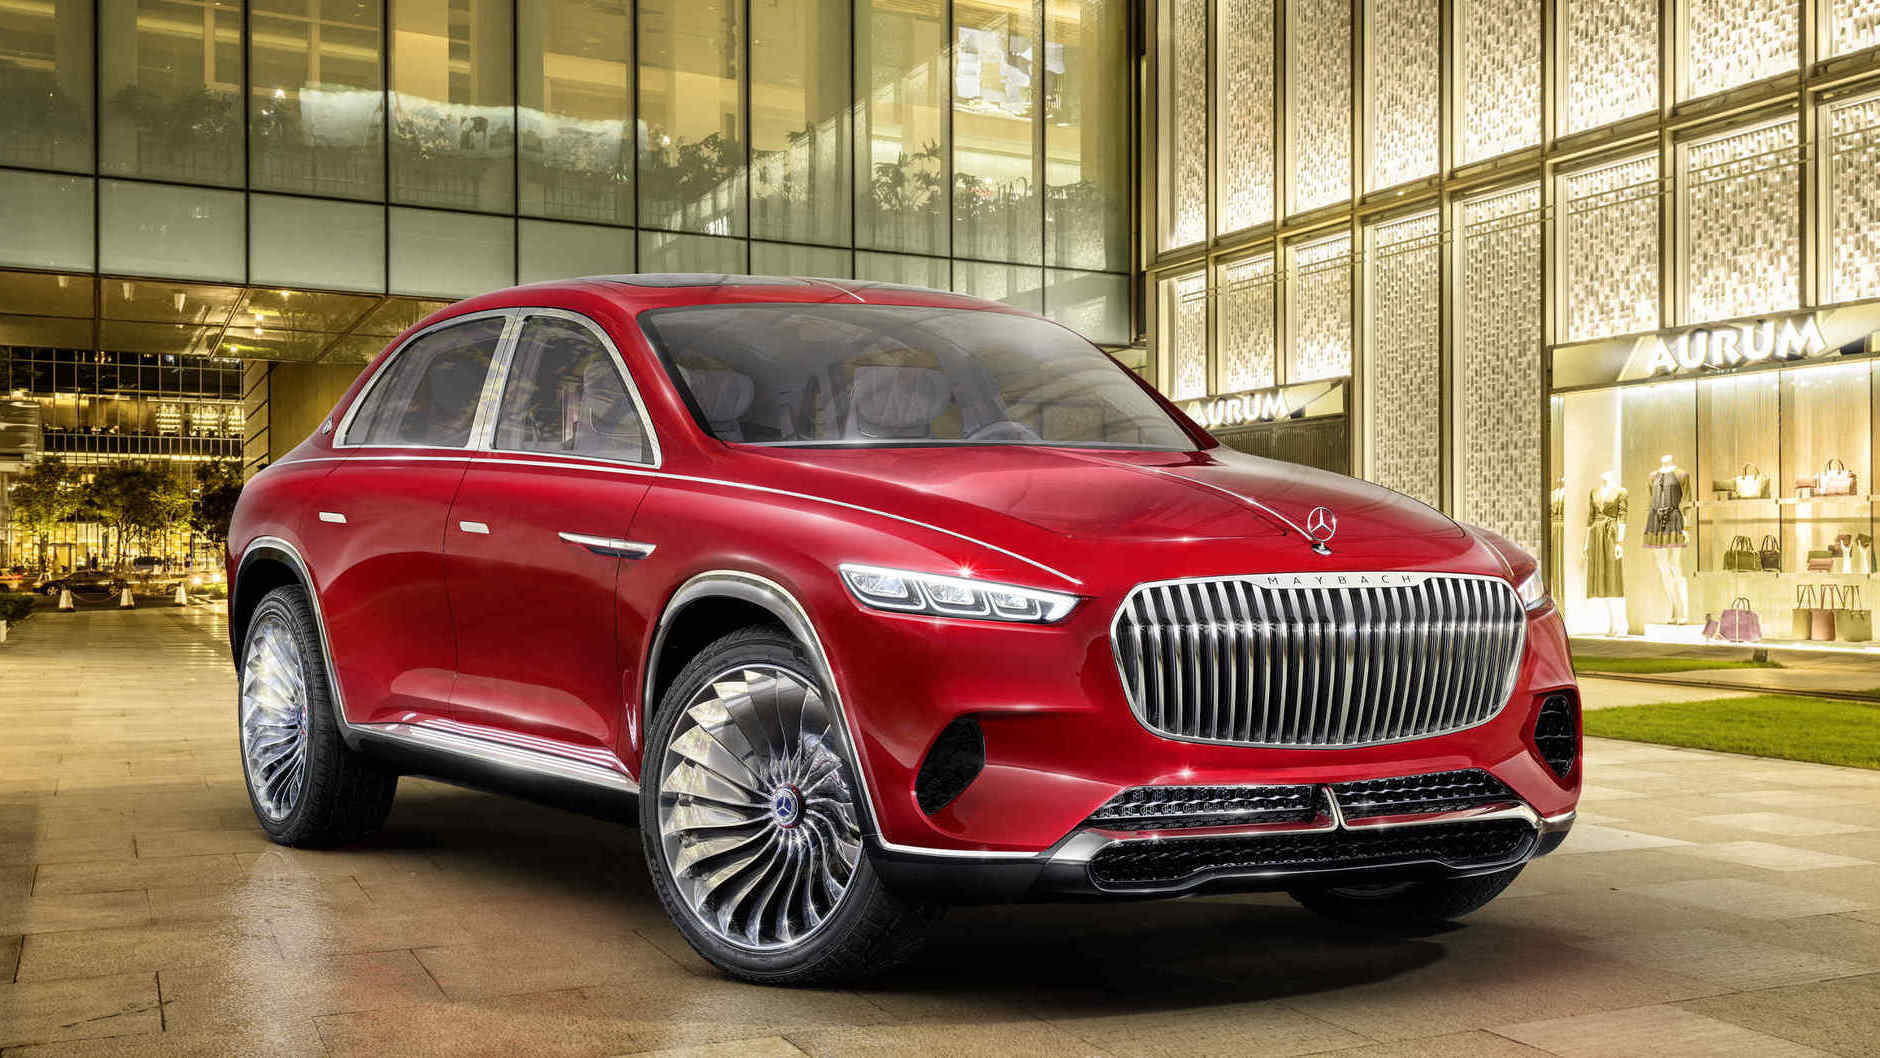 İşte Mercedes-Maybach Ultimate Luxury Concept!